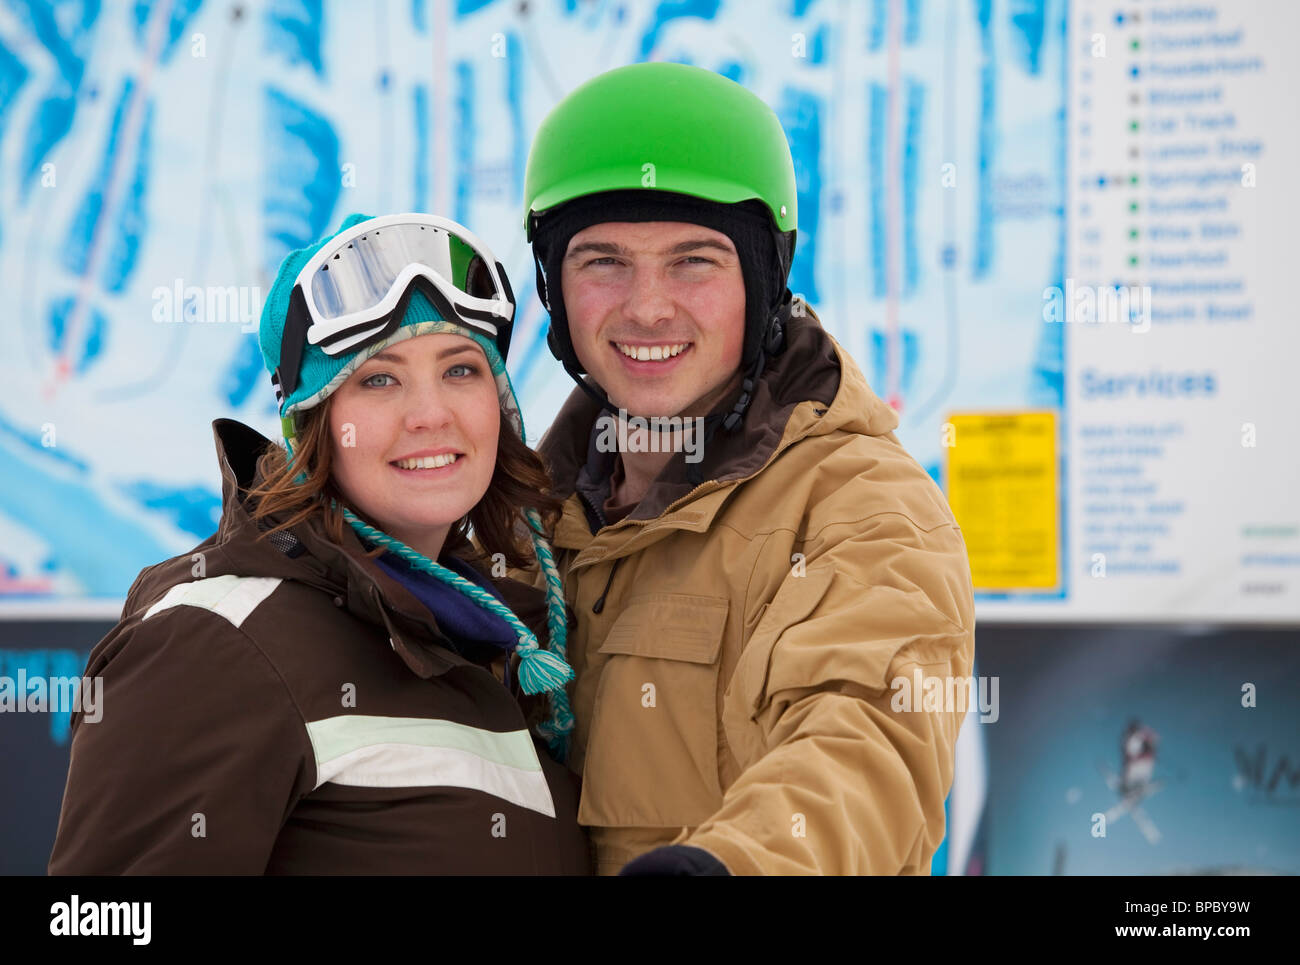 red deer, alberta, canada; a man and woman wearing a helmet and ski mask at a ski area Stock Photo